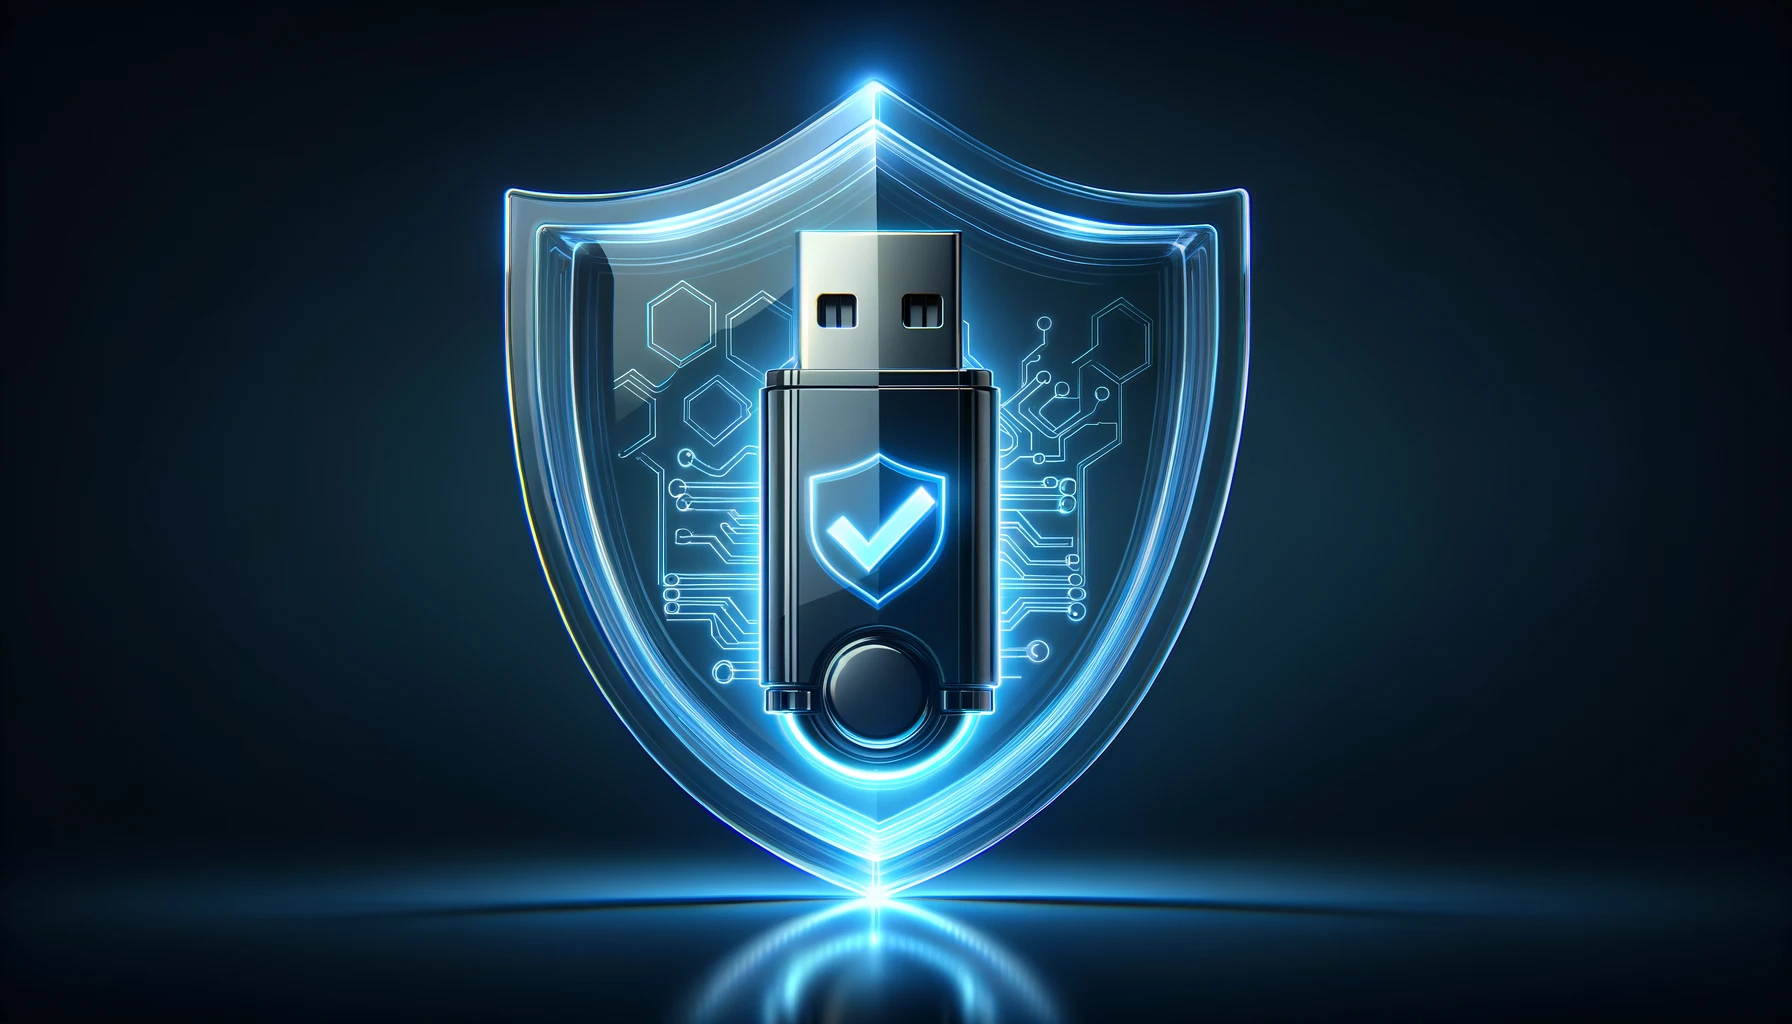 The image above visually represents the concept of data protection, featuring a USB drive securely encased within a glowing, transparent shield against a dark background, symbolizing advanced cybersecurity measures safeguarding digital data.